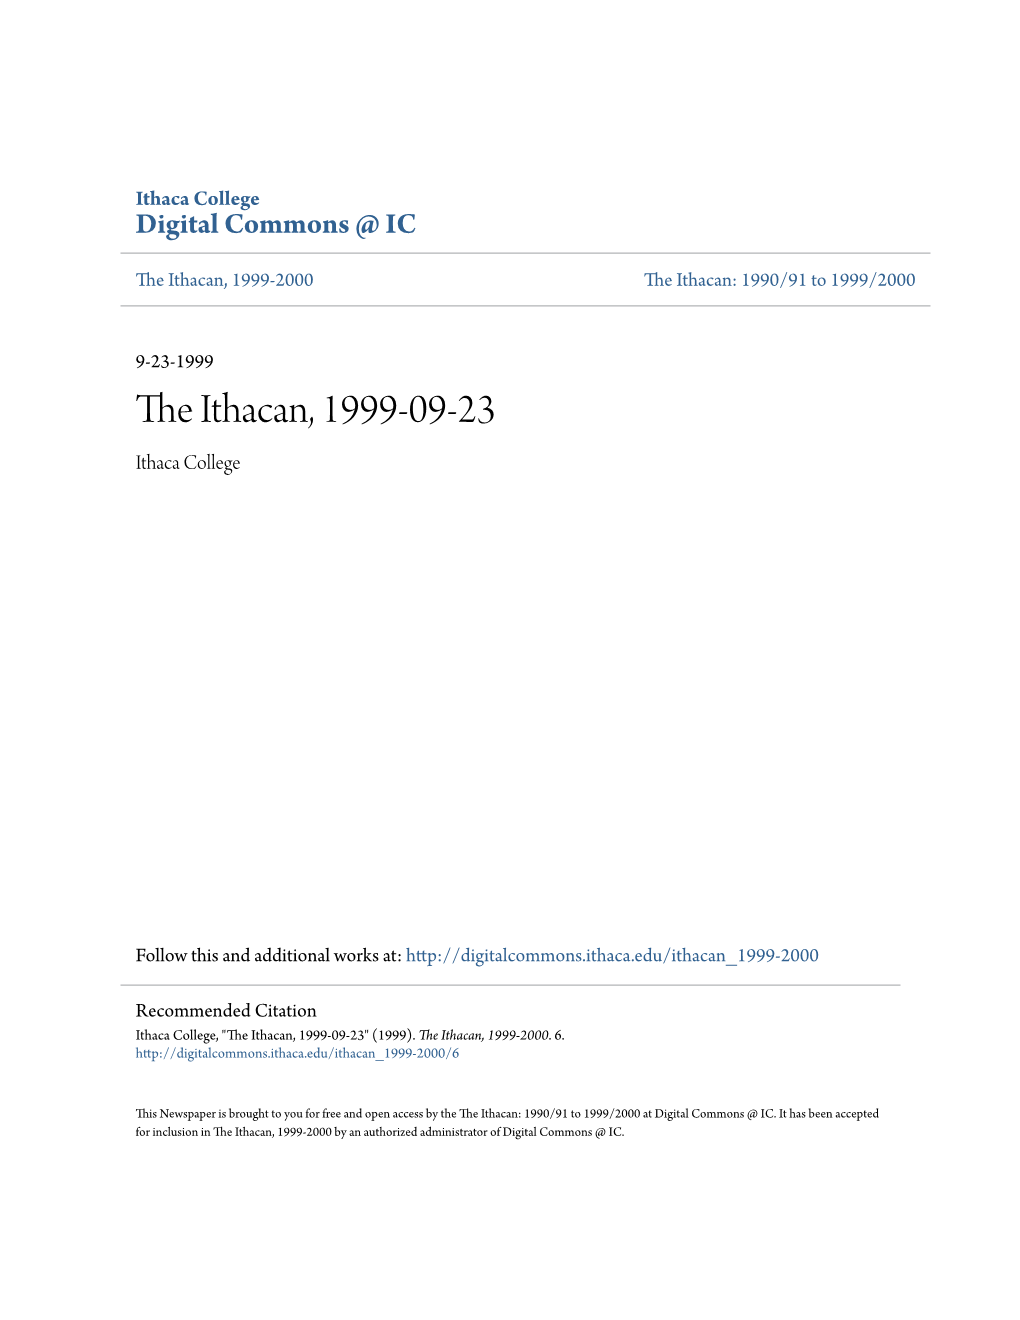 The Ithacan, 1999-09-23